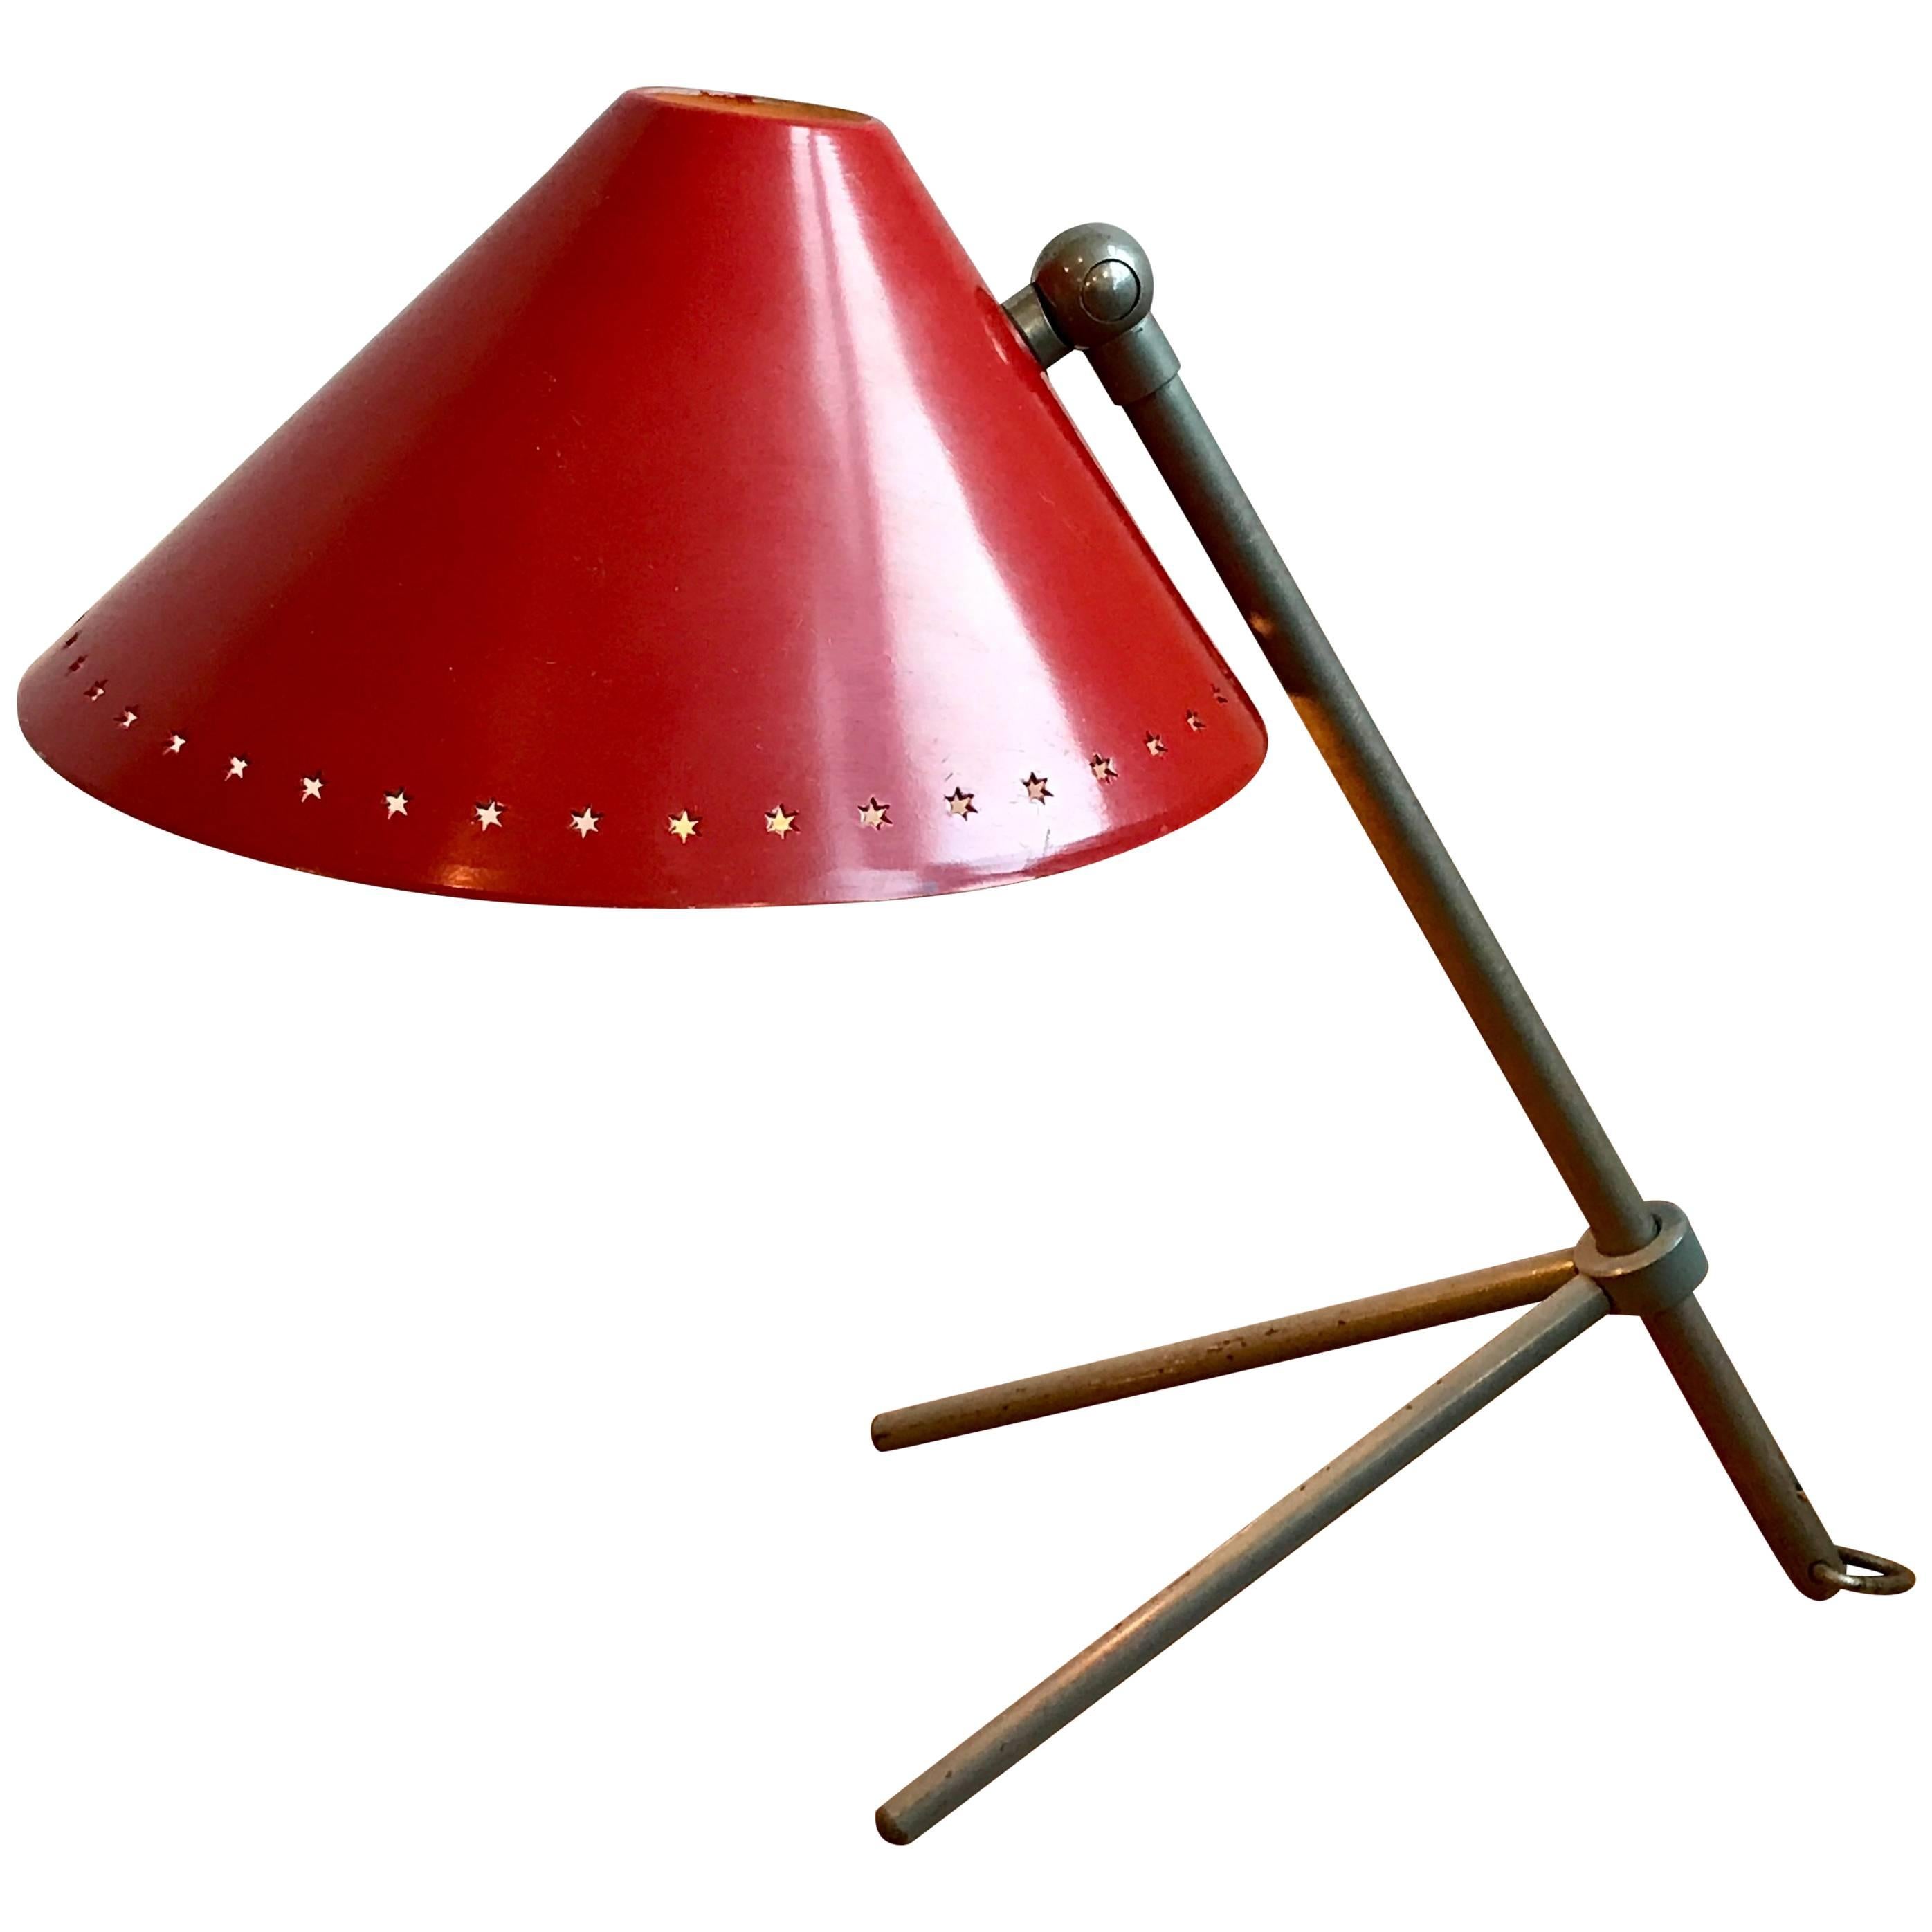 Midcentury "Pinocchio" Table or Wall Mount Lamp by H. Busquet for Hala, 1950s